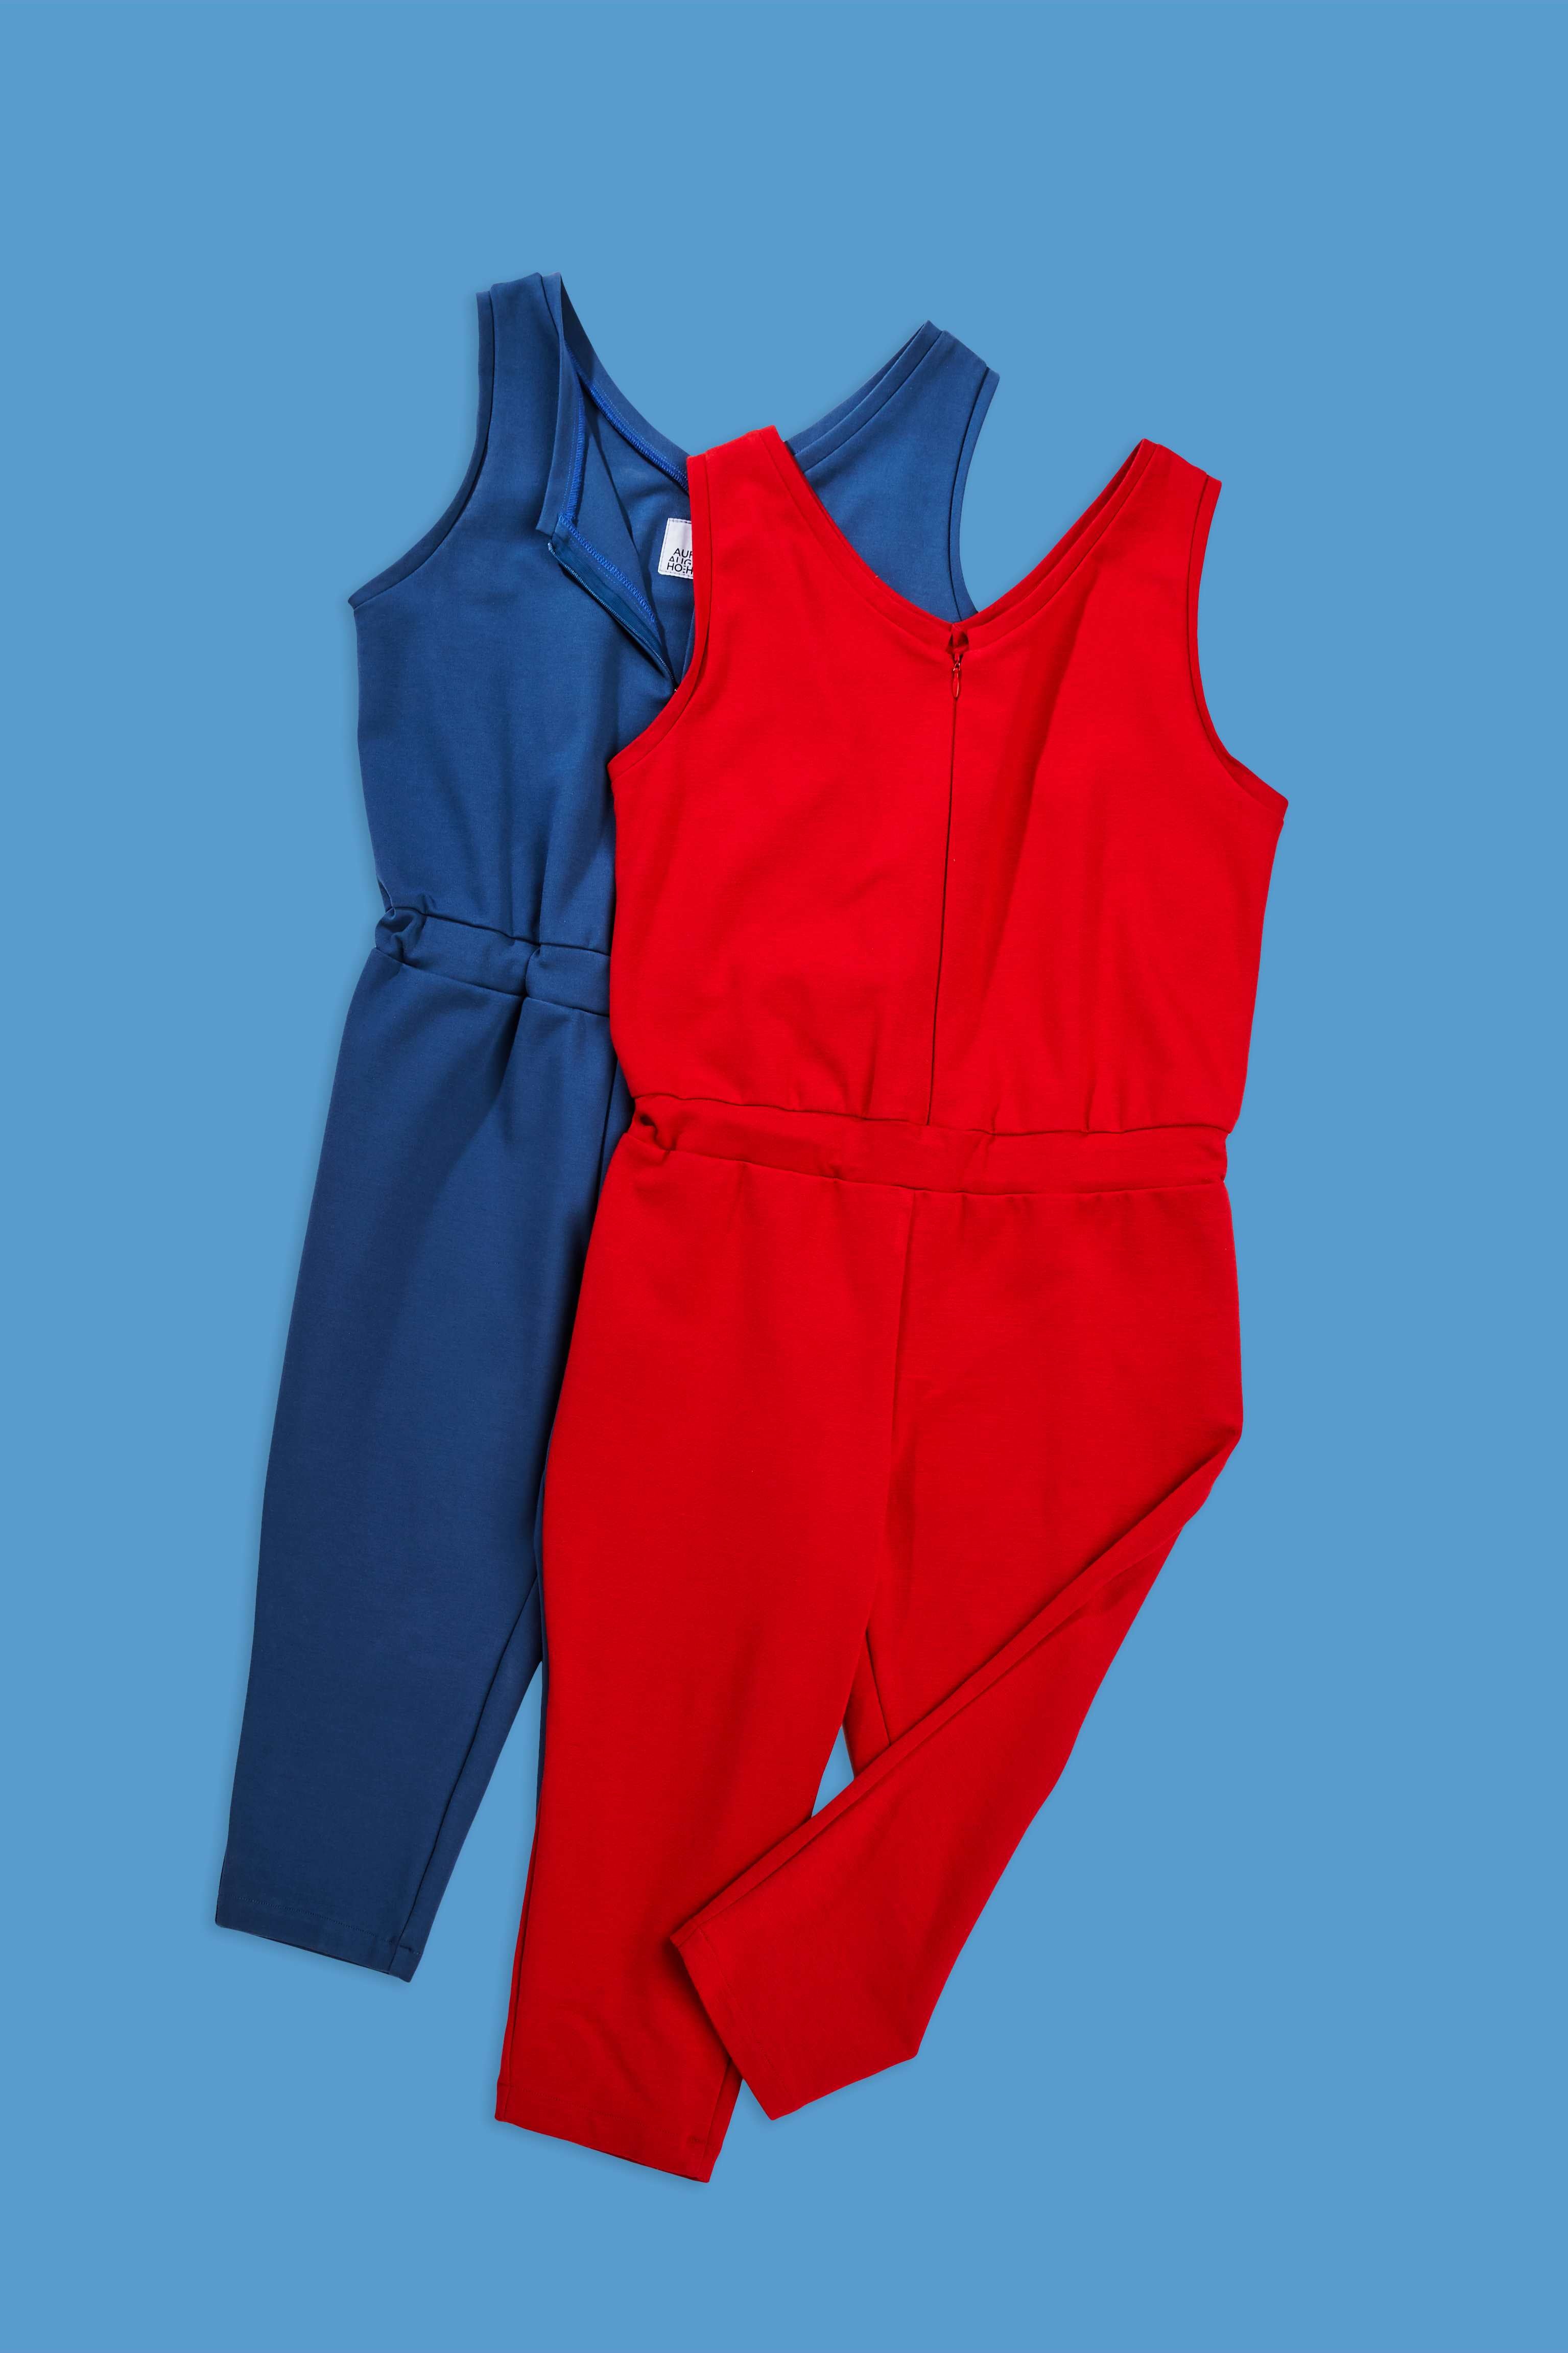 red and blue jumpsuits for people with dwarfism on blue background